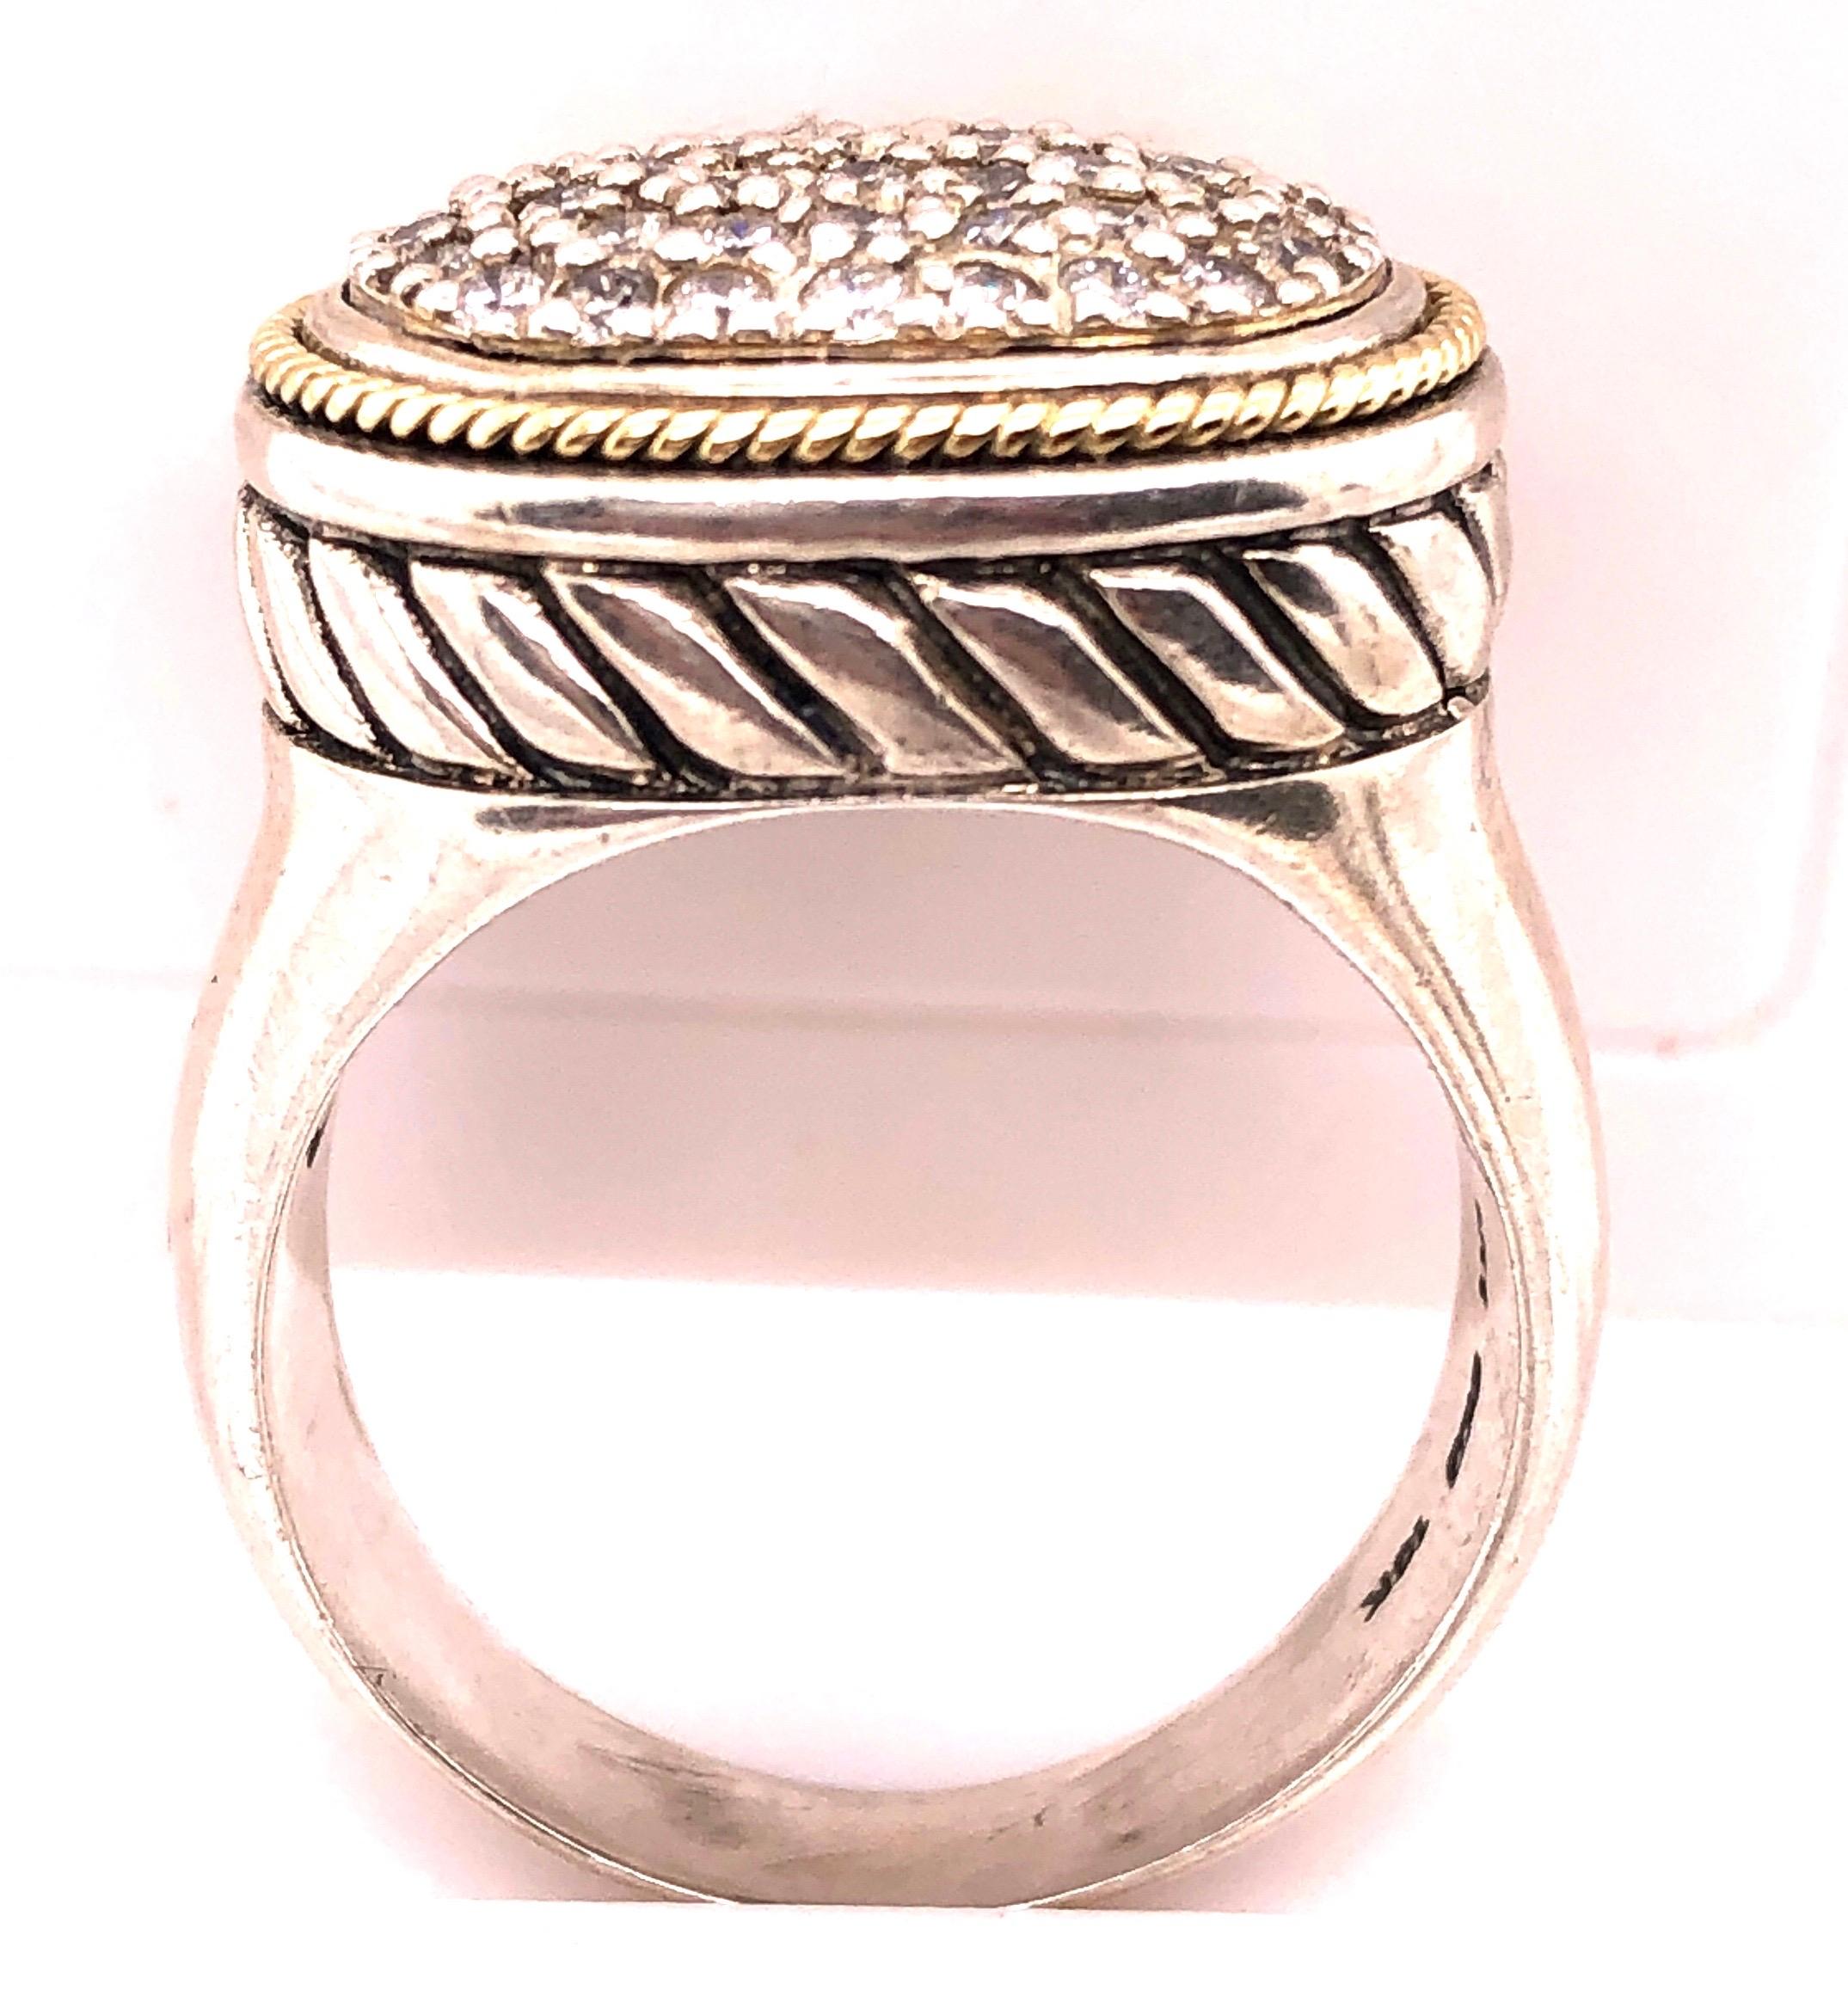 18Kt Two Tone Gold Effy Fashion Ring with Diamonds.
Size 7.75 
12.1 grams total weight.